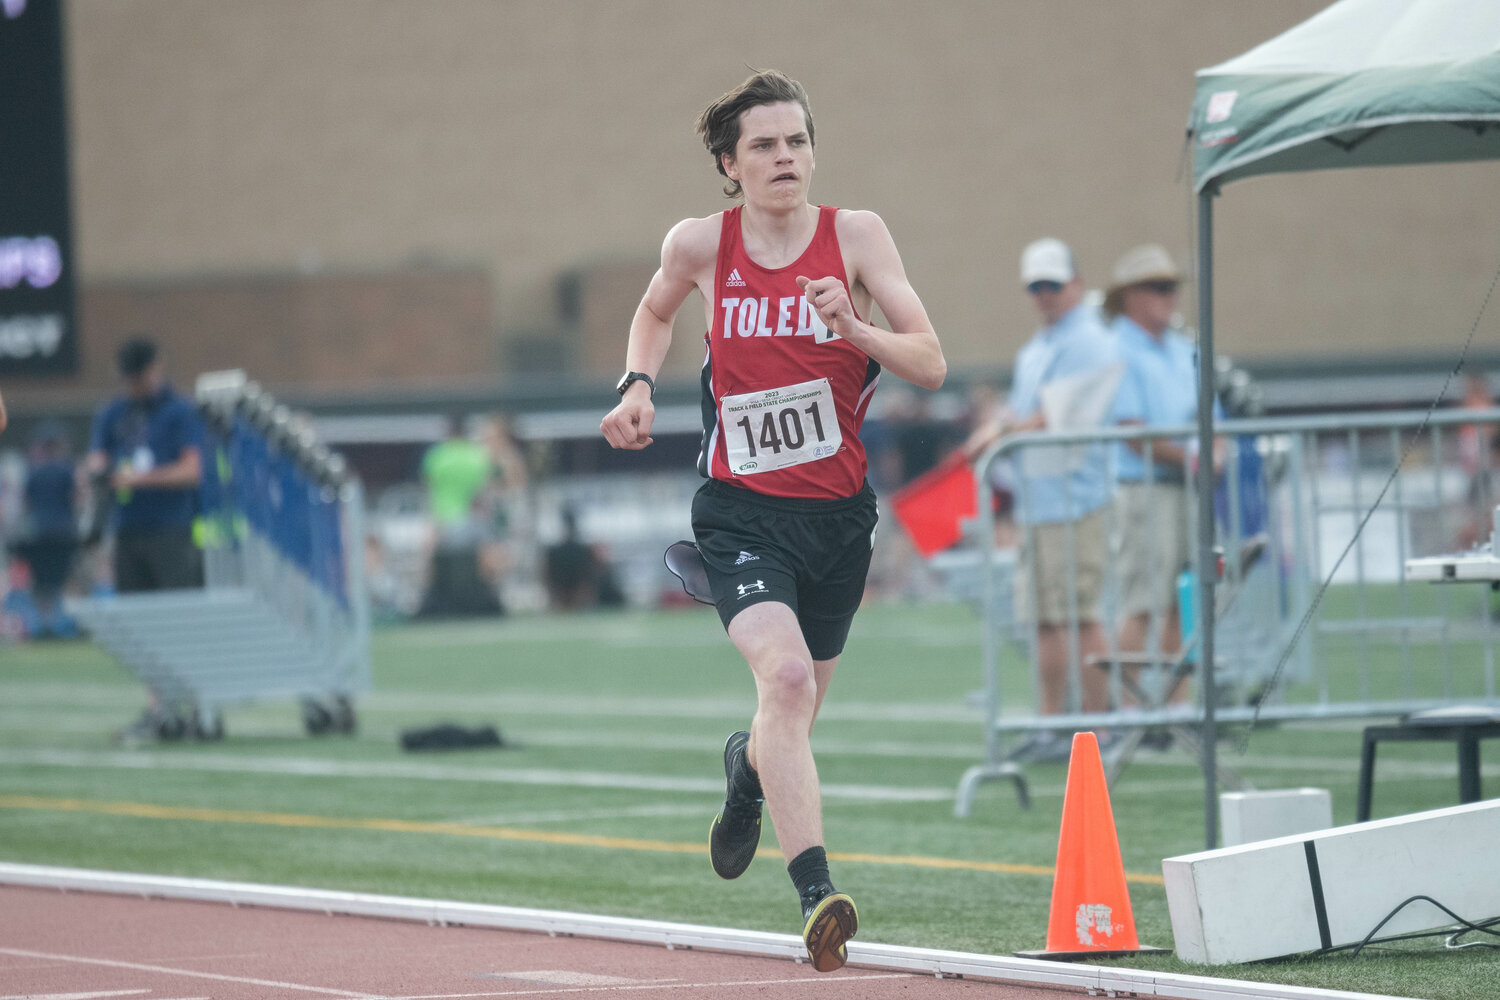 Toledo's Treyton Marty runs in the finals of the 1,600 meters at the 2B state championships at Zaepfel Stadium in Yakima on May 25.